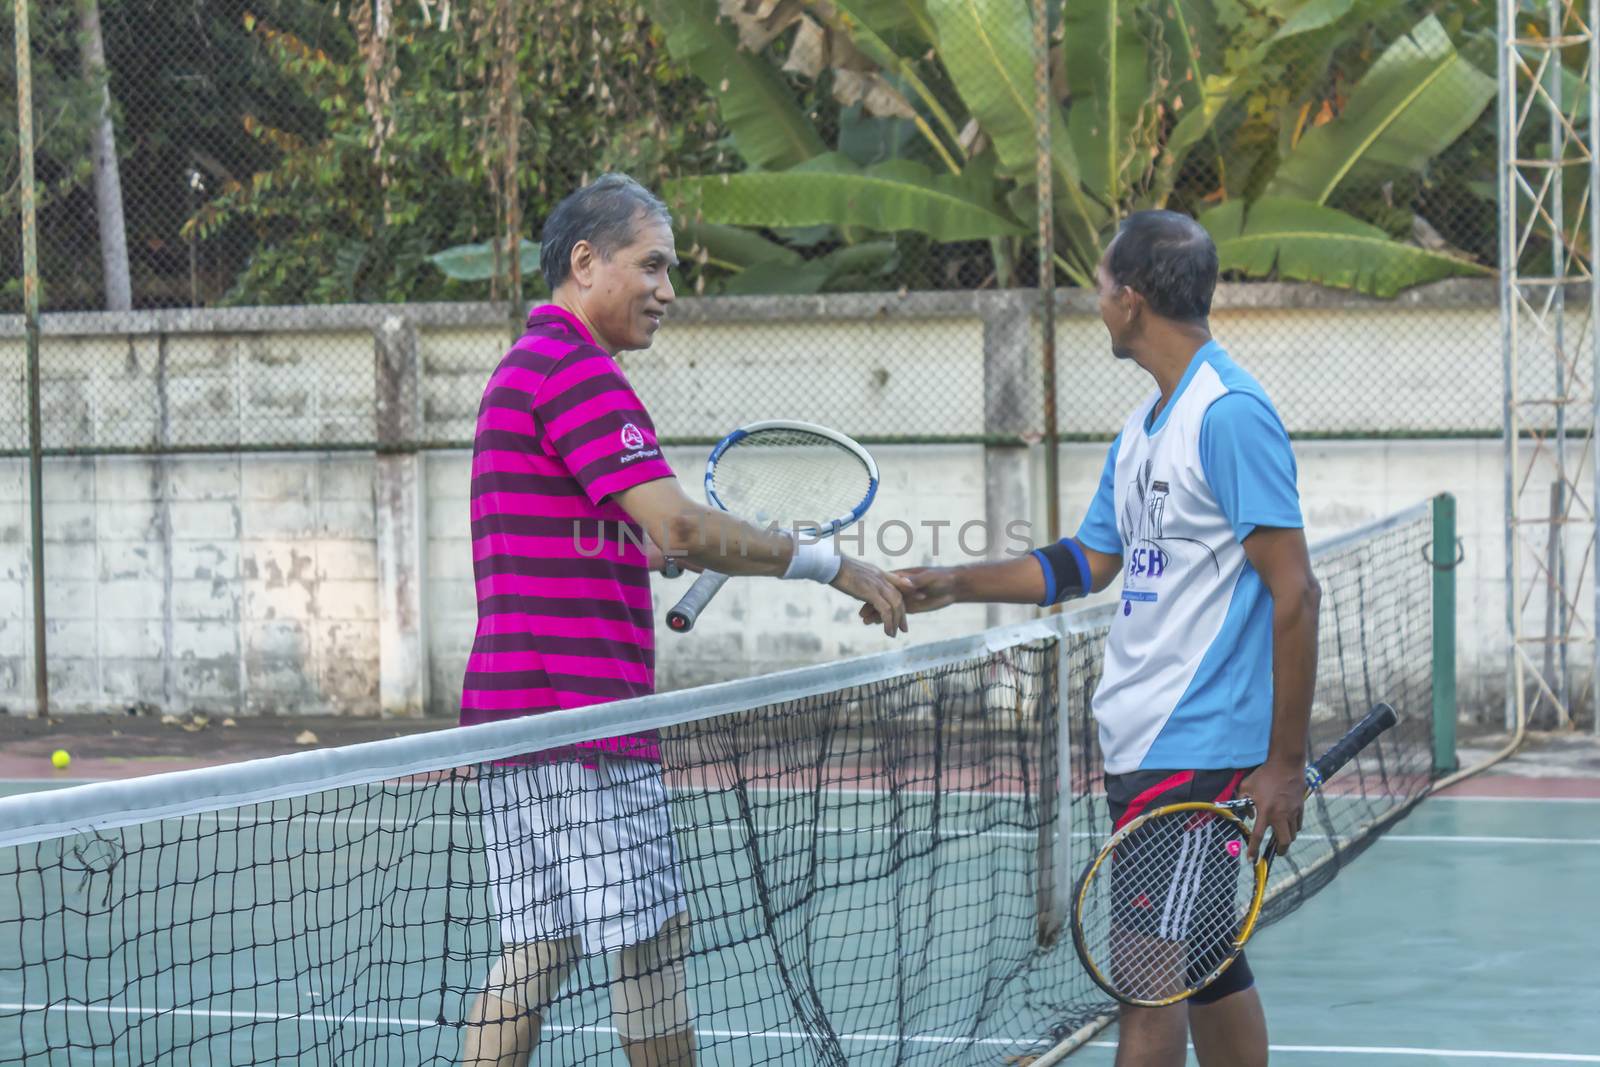 SURAT THANI, THAILAND - MARCH 1:Unidentified Thai senior tennis players shakes the hands after winning the match on March 1, 2014 in Chaiya tennis court, Surat Thani, Thailand.
